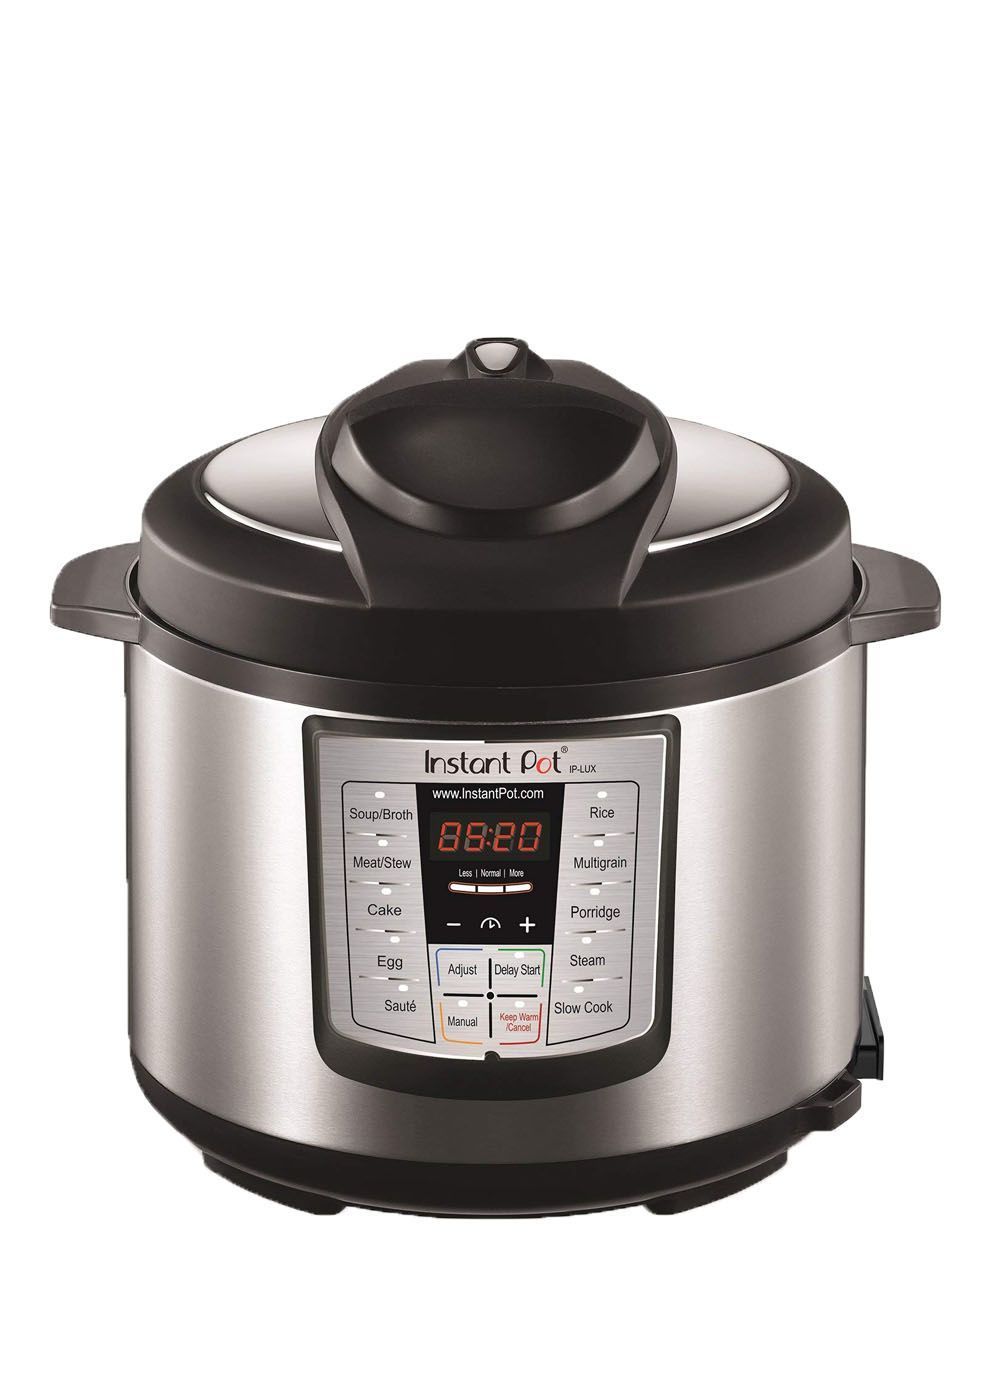 The Best Instant Pots to Buy 2019 TopRated Instant Pot Models Tested